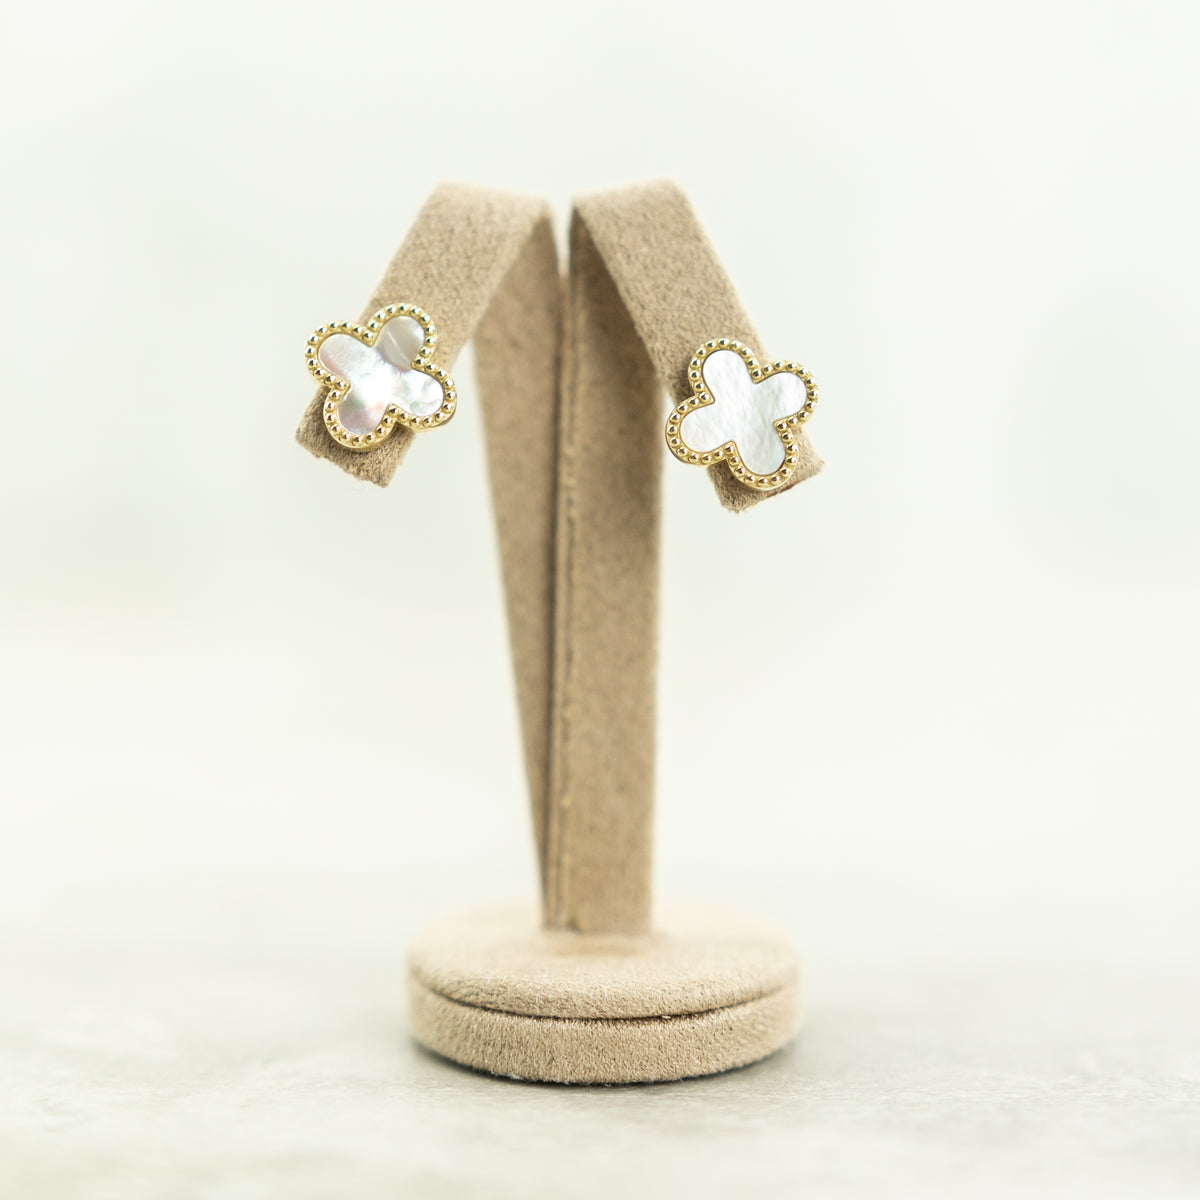 Designer Inspired 9ct Large Yellow Gold Mother of Pearl Petal Earrings